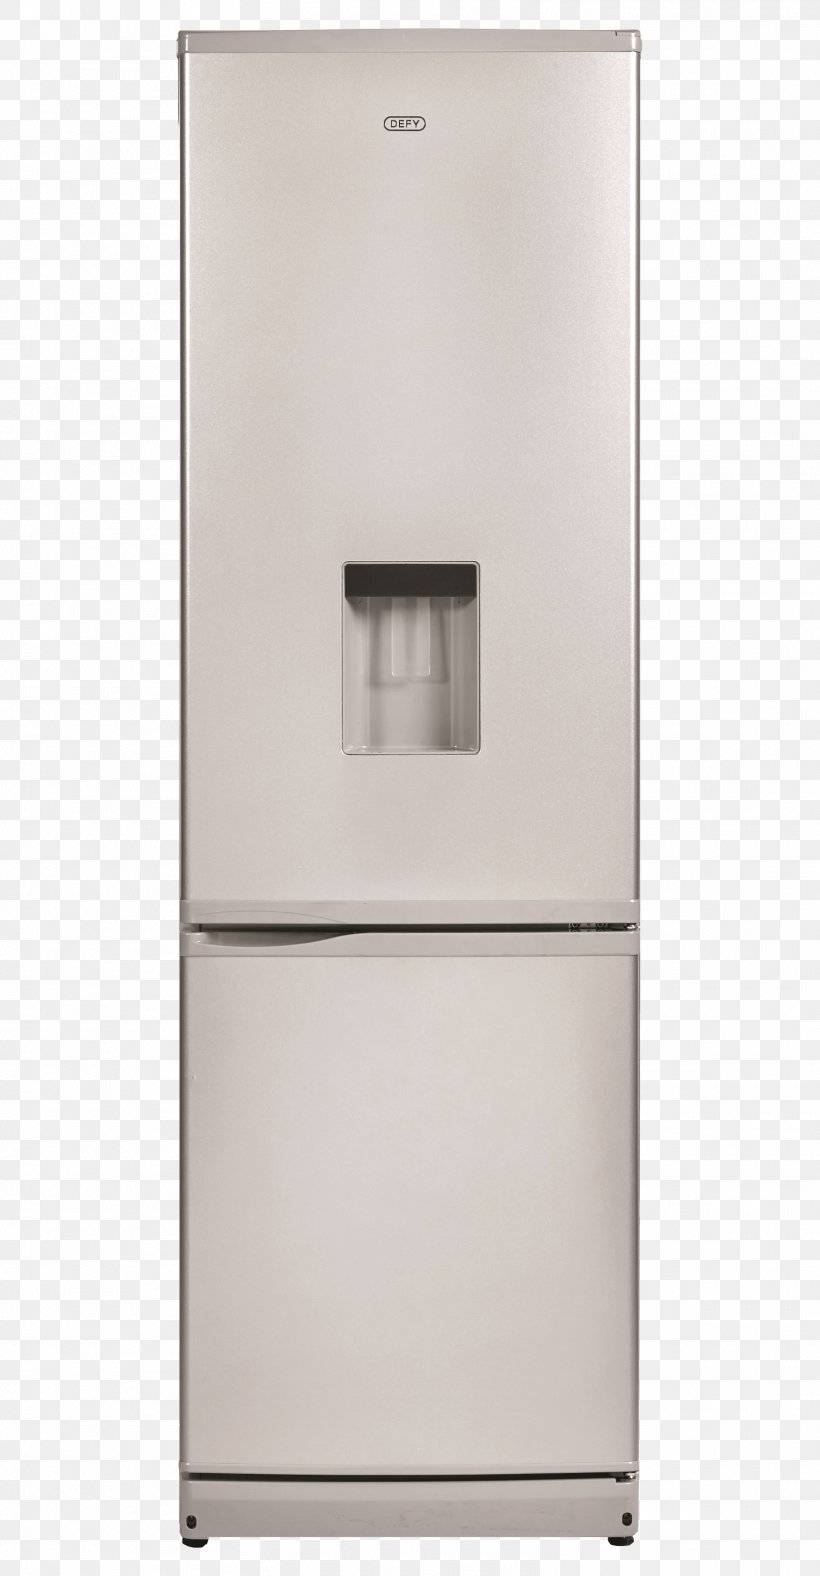 Refrigerator, PNG, 1560x3000px, Refrigerator, Home Appliance, Kitchen Appliance, Major Appliance Download Free